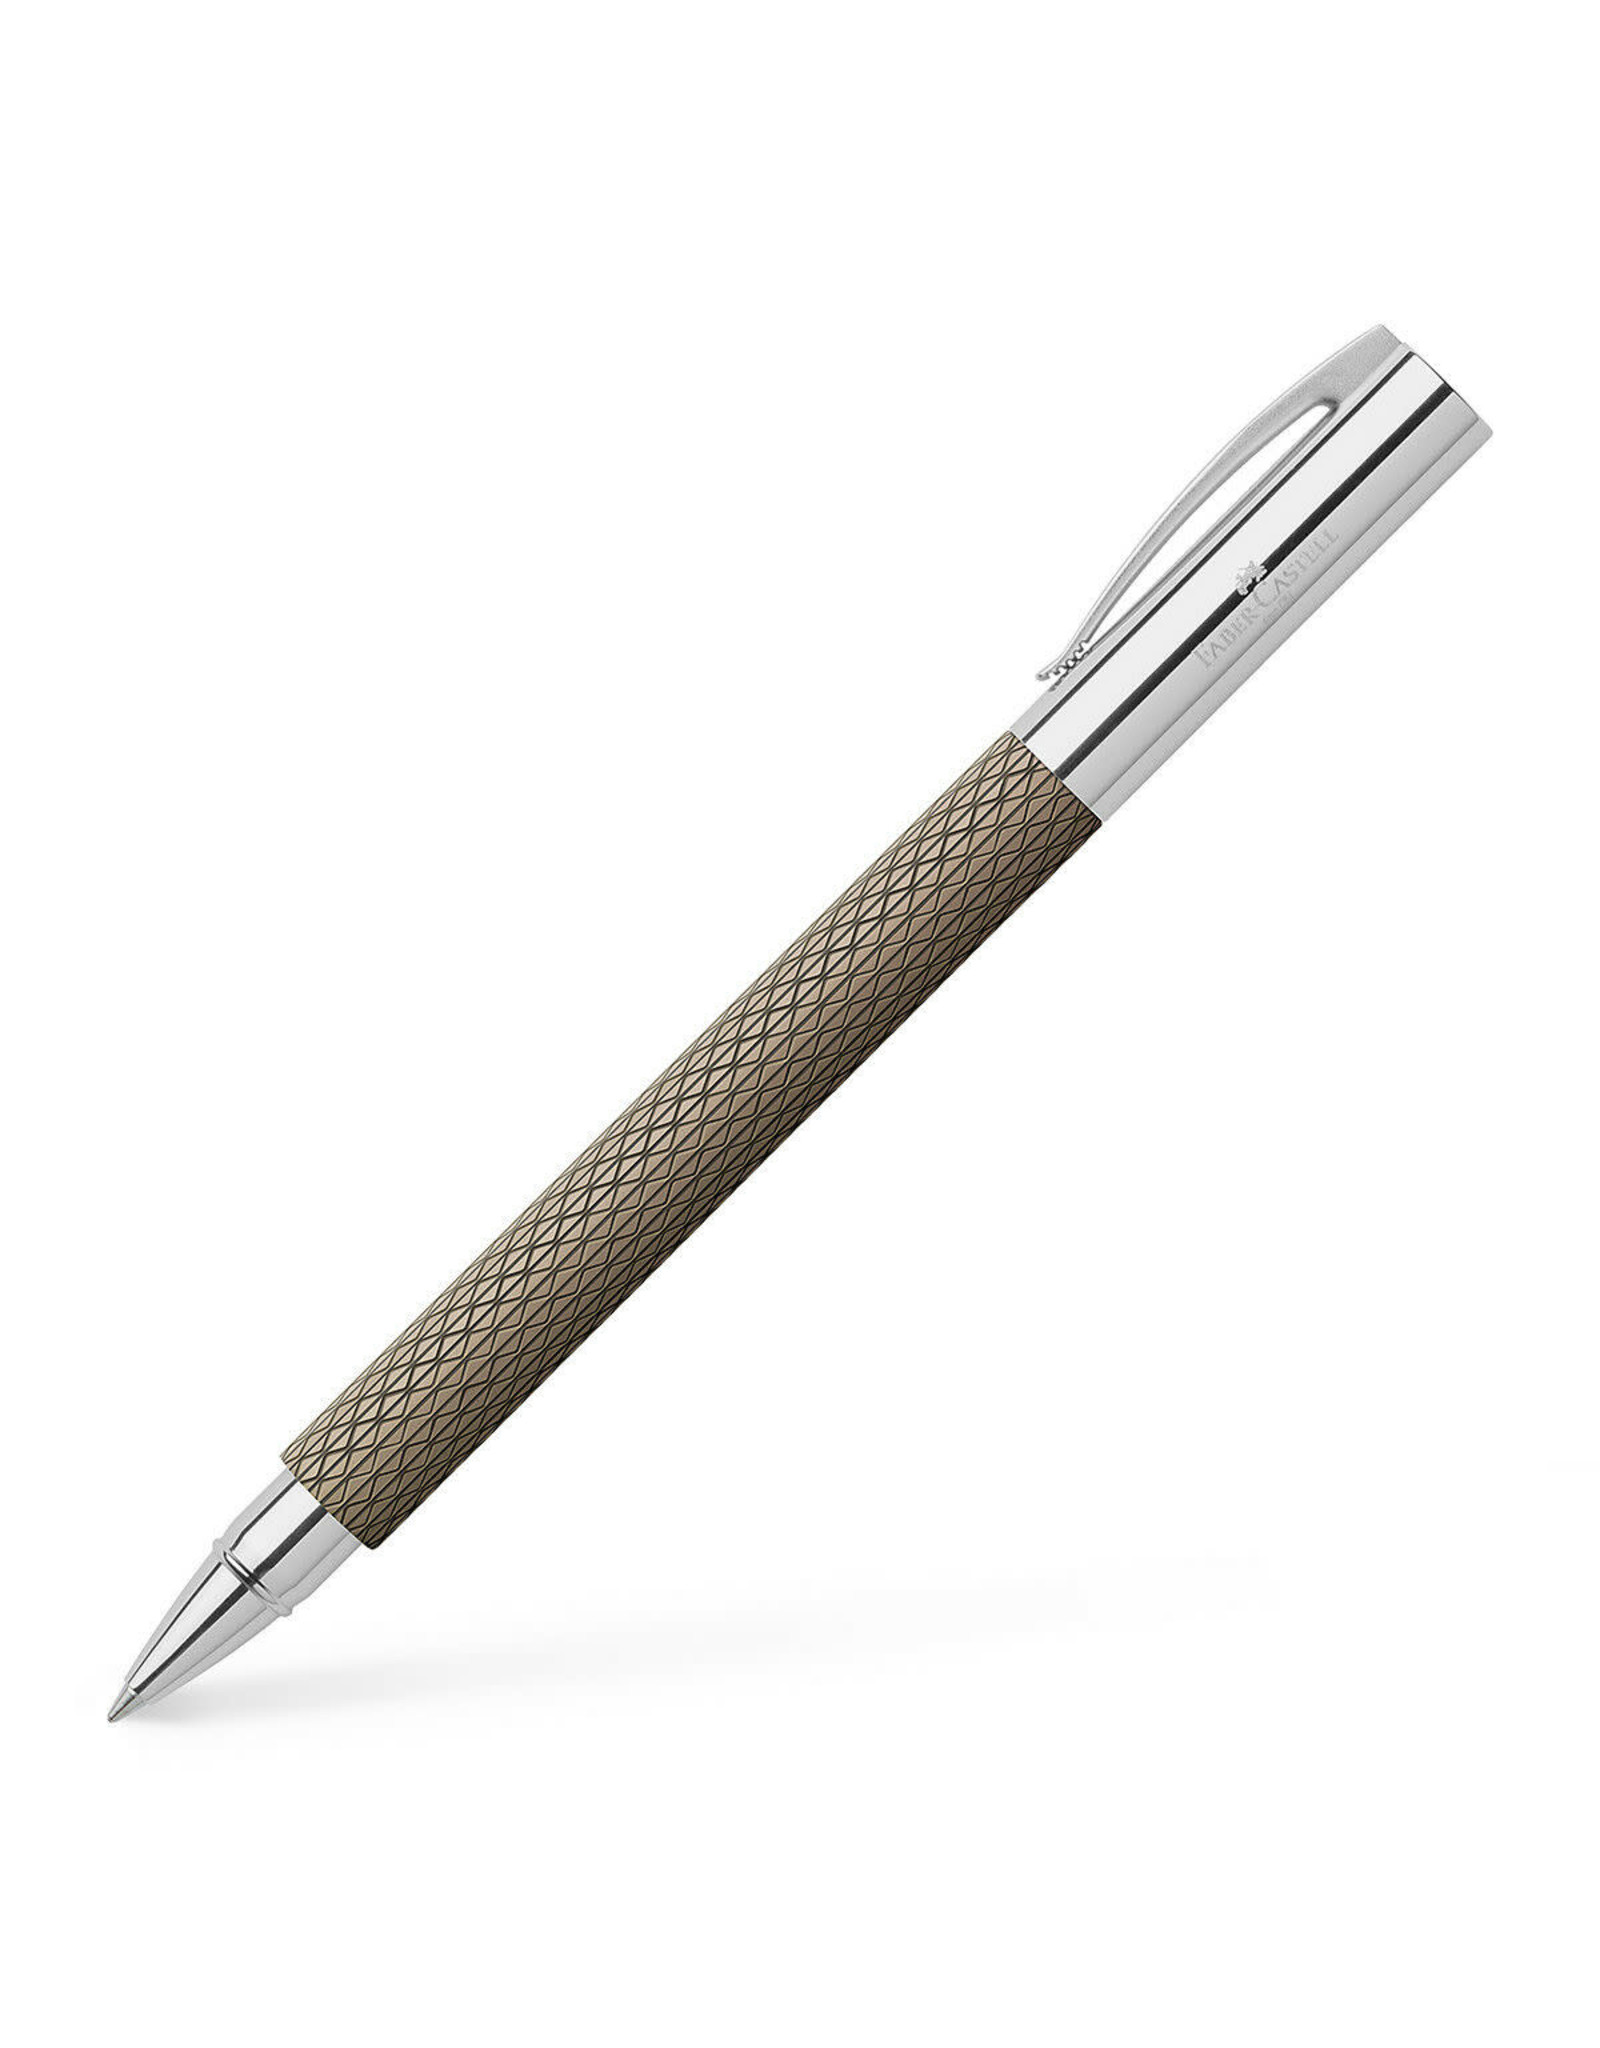 FABER-CASTELL Ambition OpArt Rollerball Pen, Sand